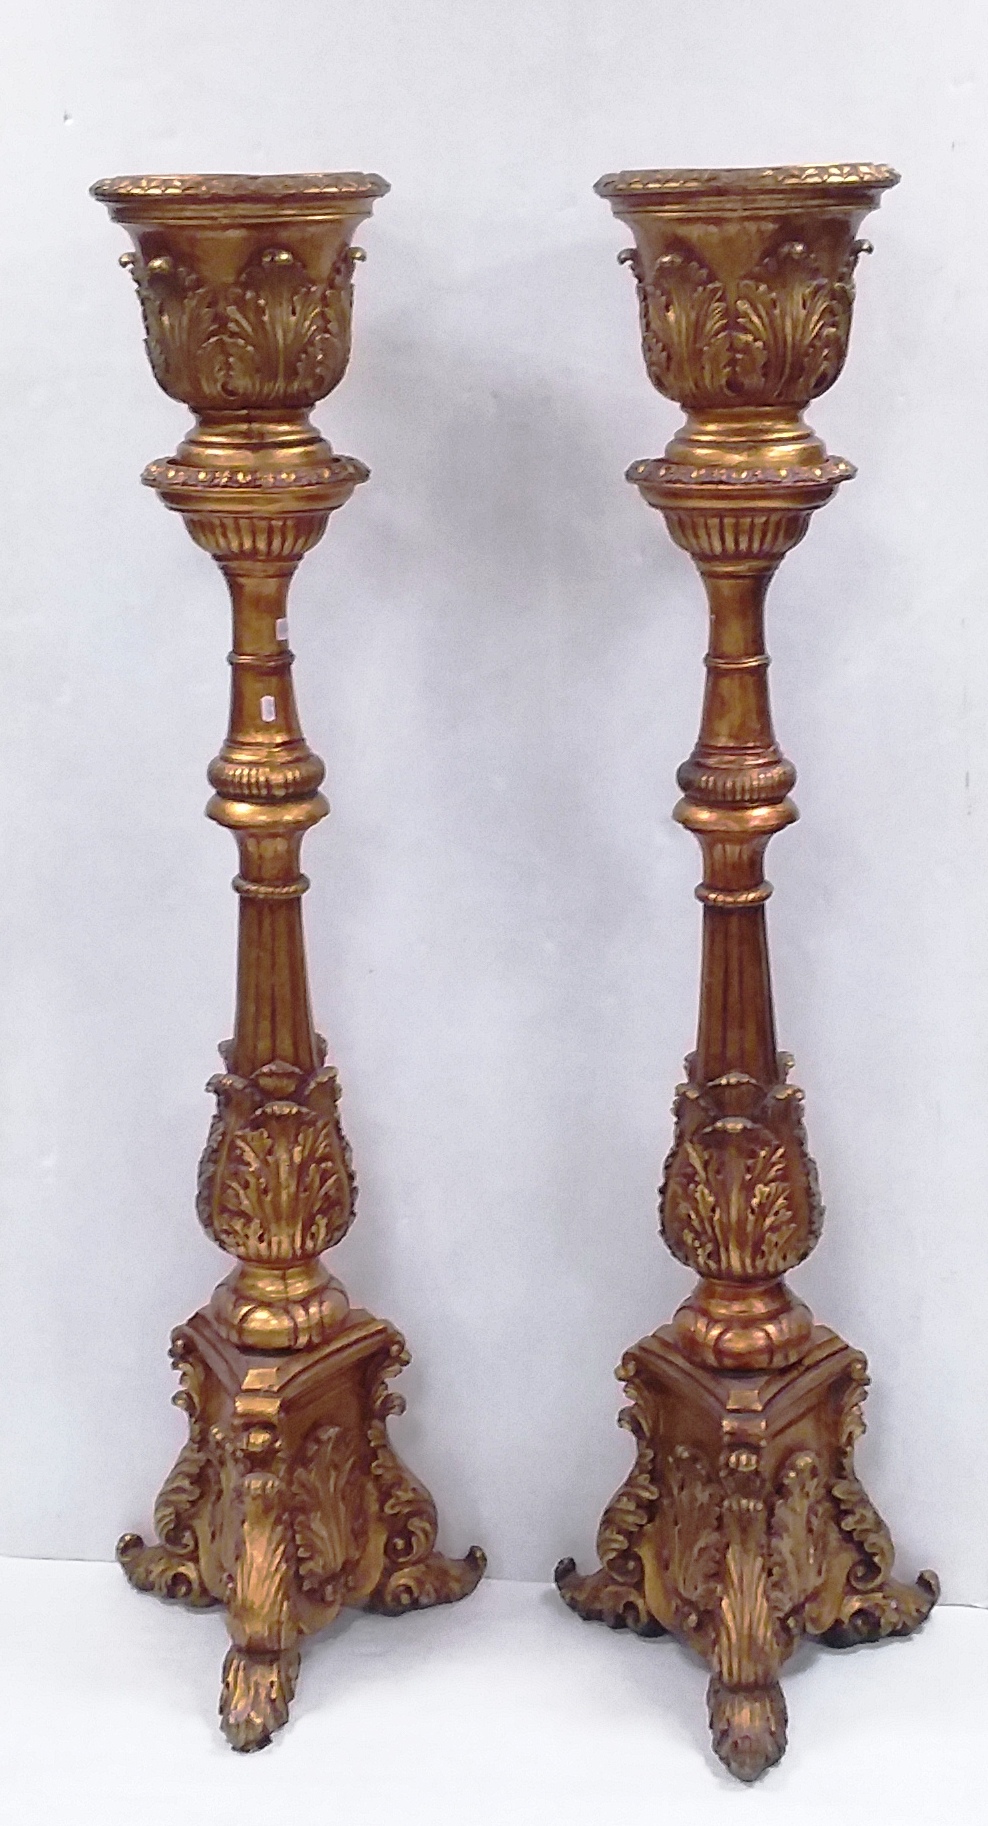 Unusual Pair of Gilt Torcheres & Planters